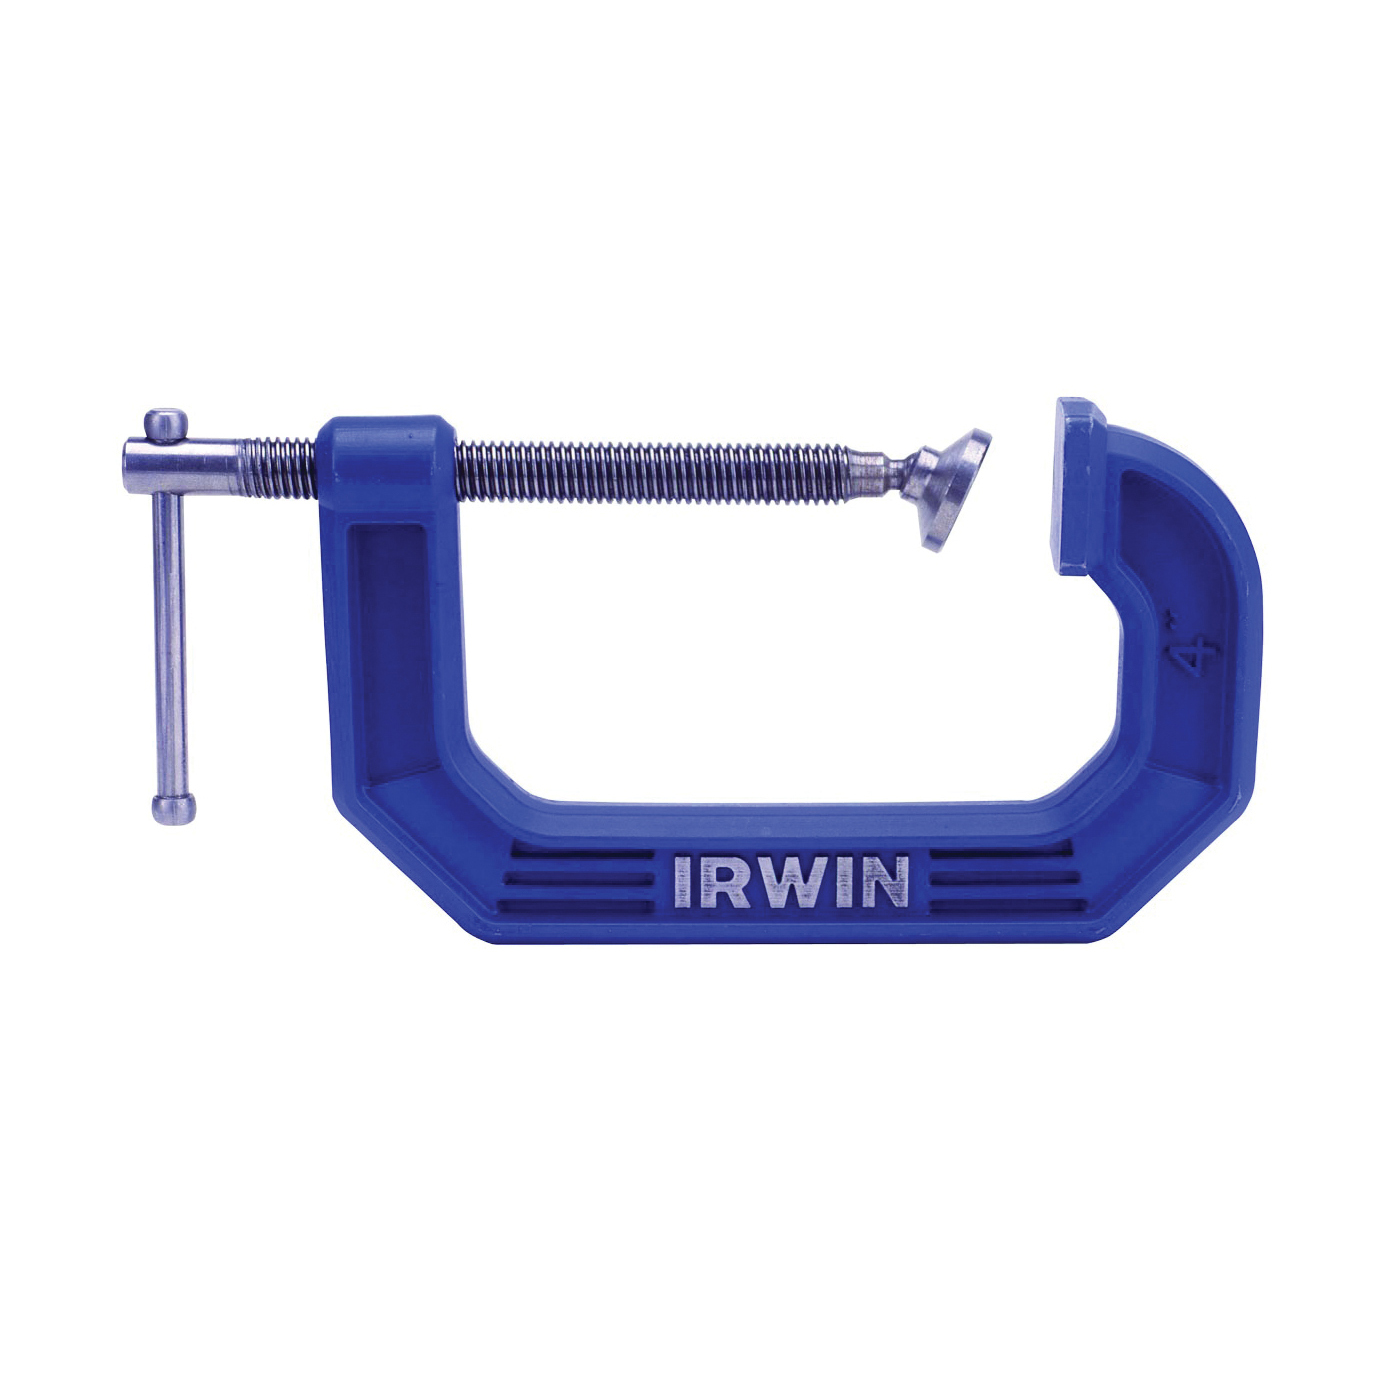 225108 C-Clamp, 900 lb Clamping, 8 in Max Opening Size, 4 in D Throat, Steel Body, Blue Body